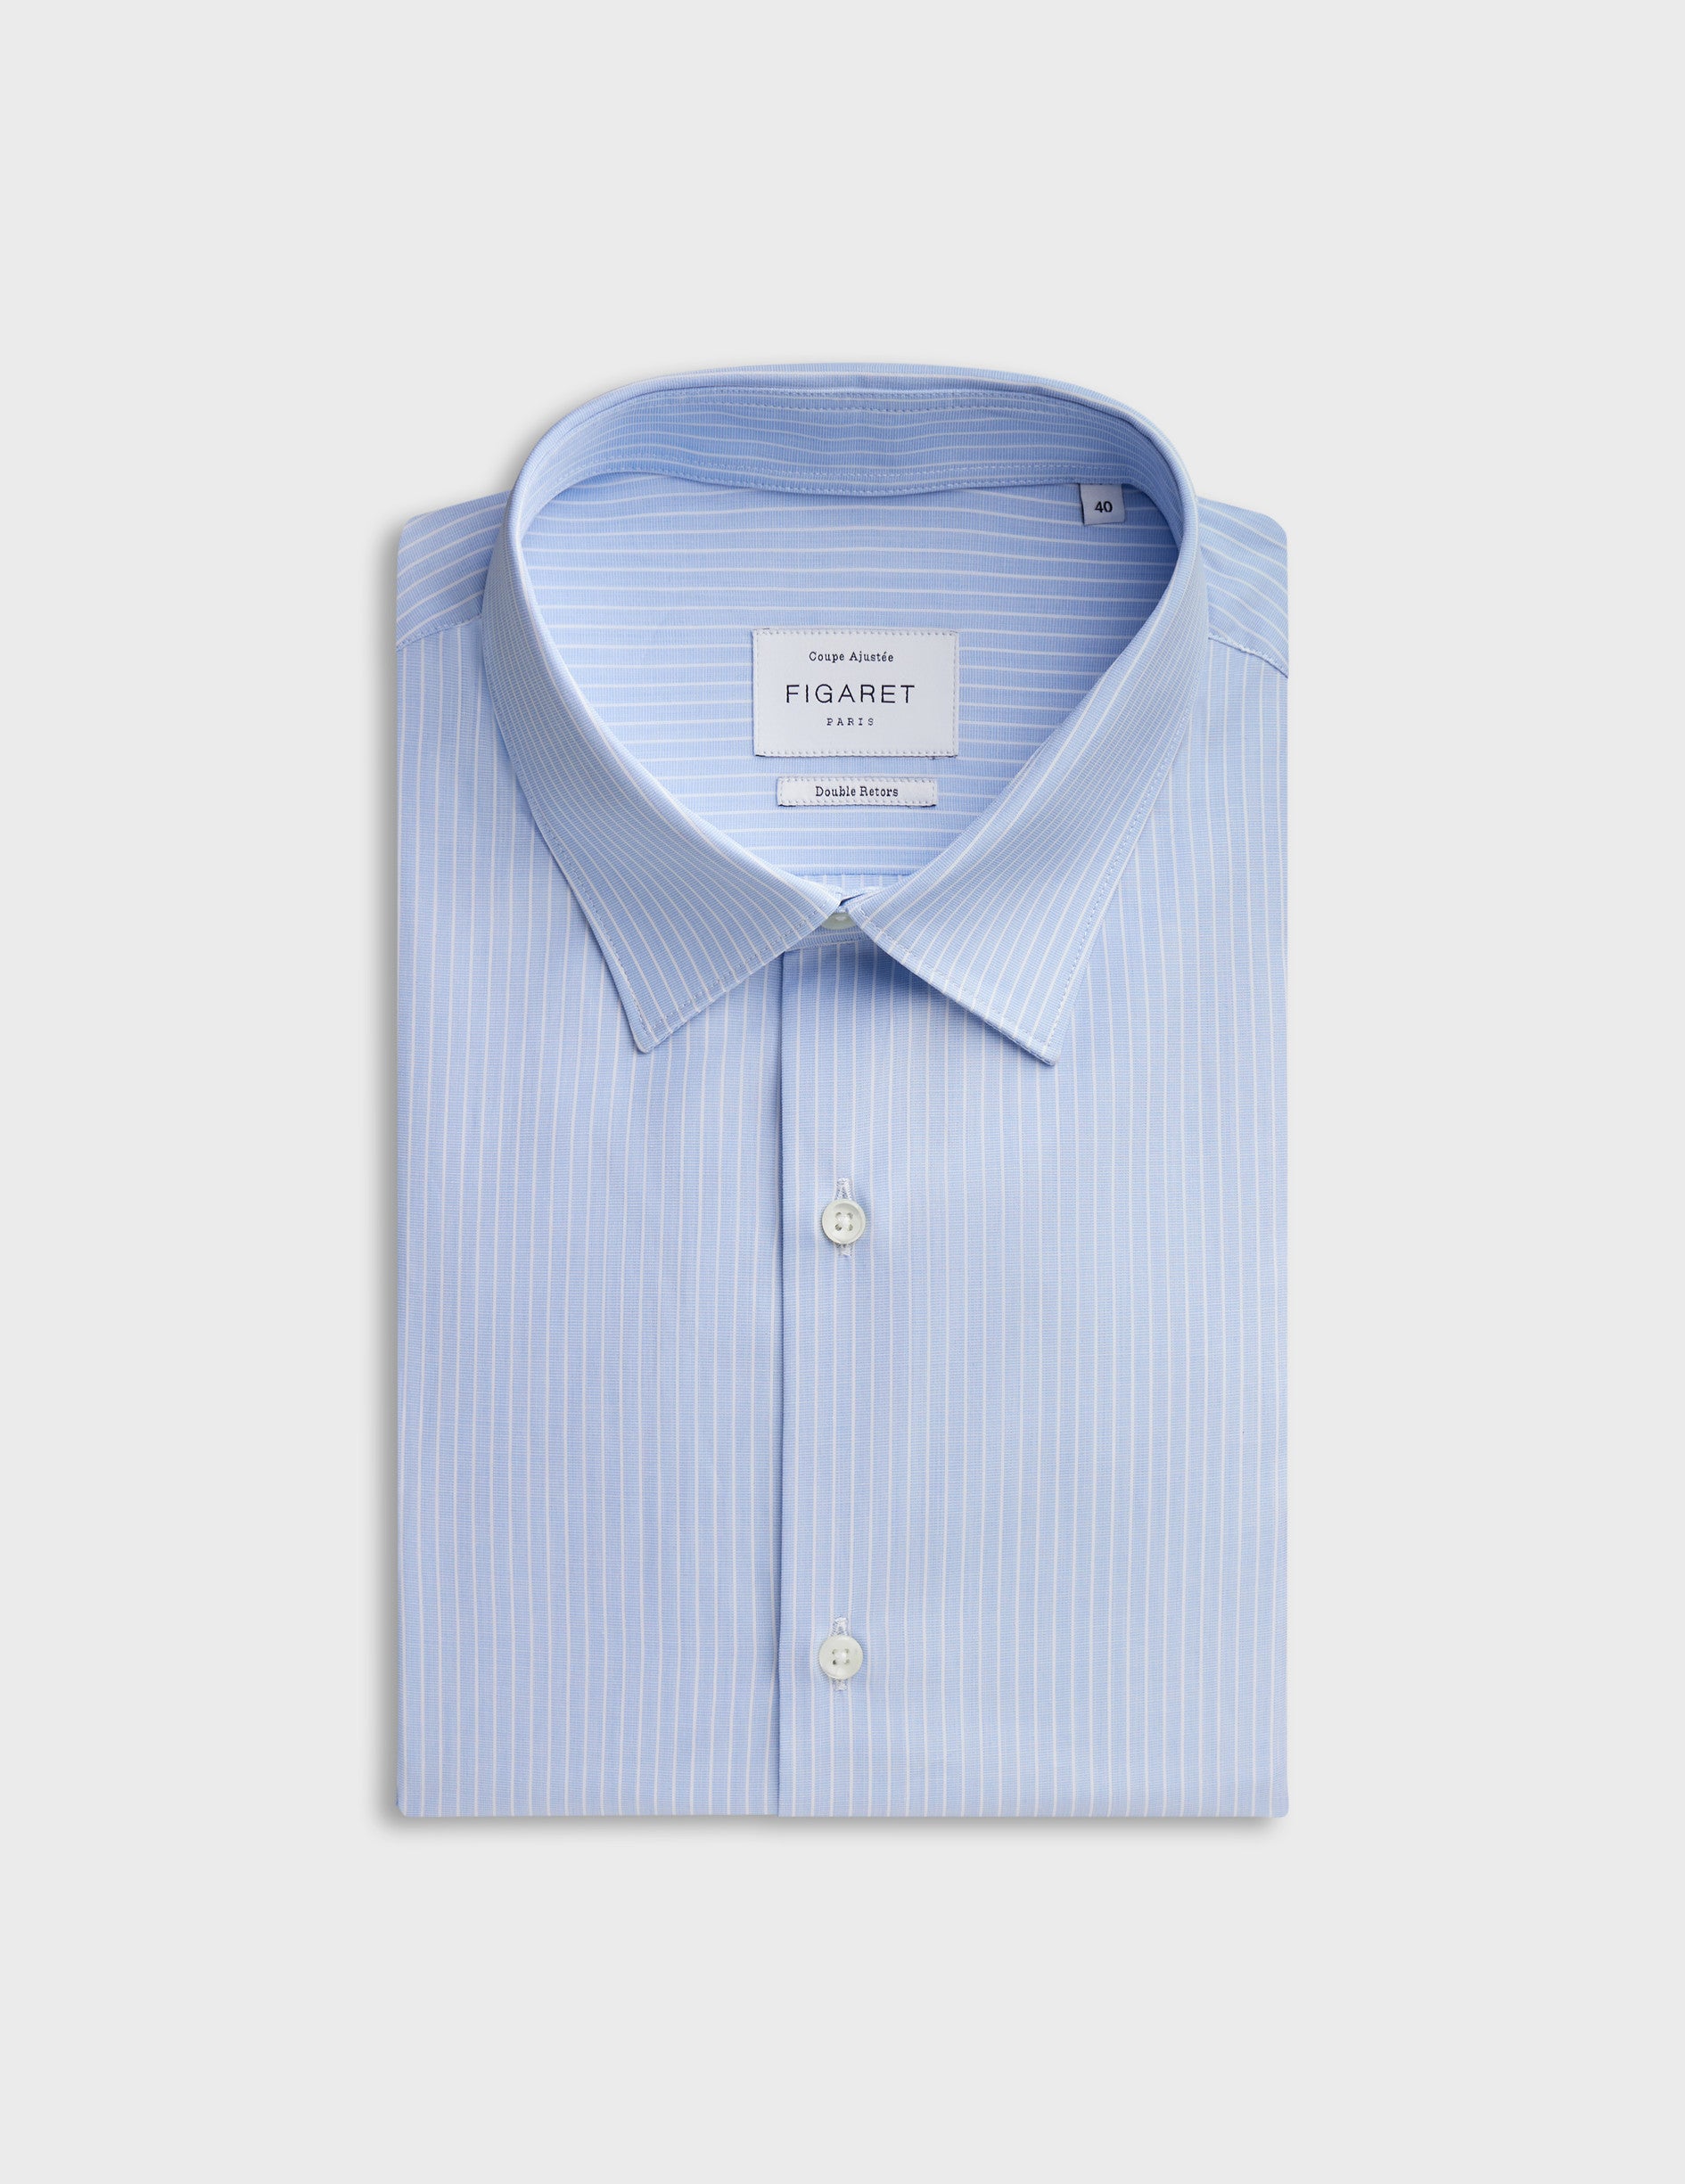 Blue striped fitted shirt - Wire to wire - Figaret Collar